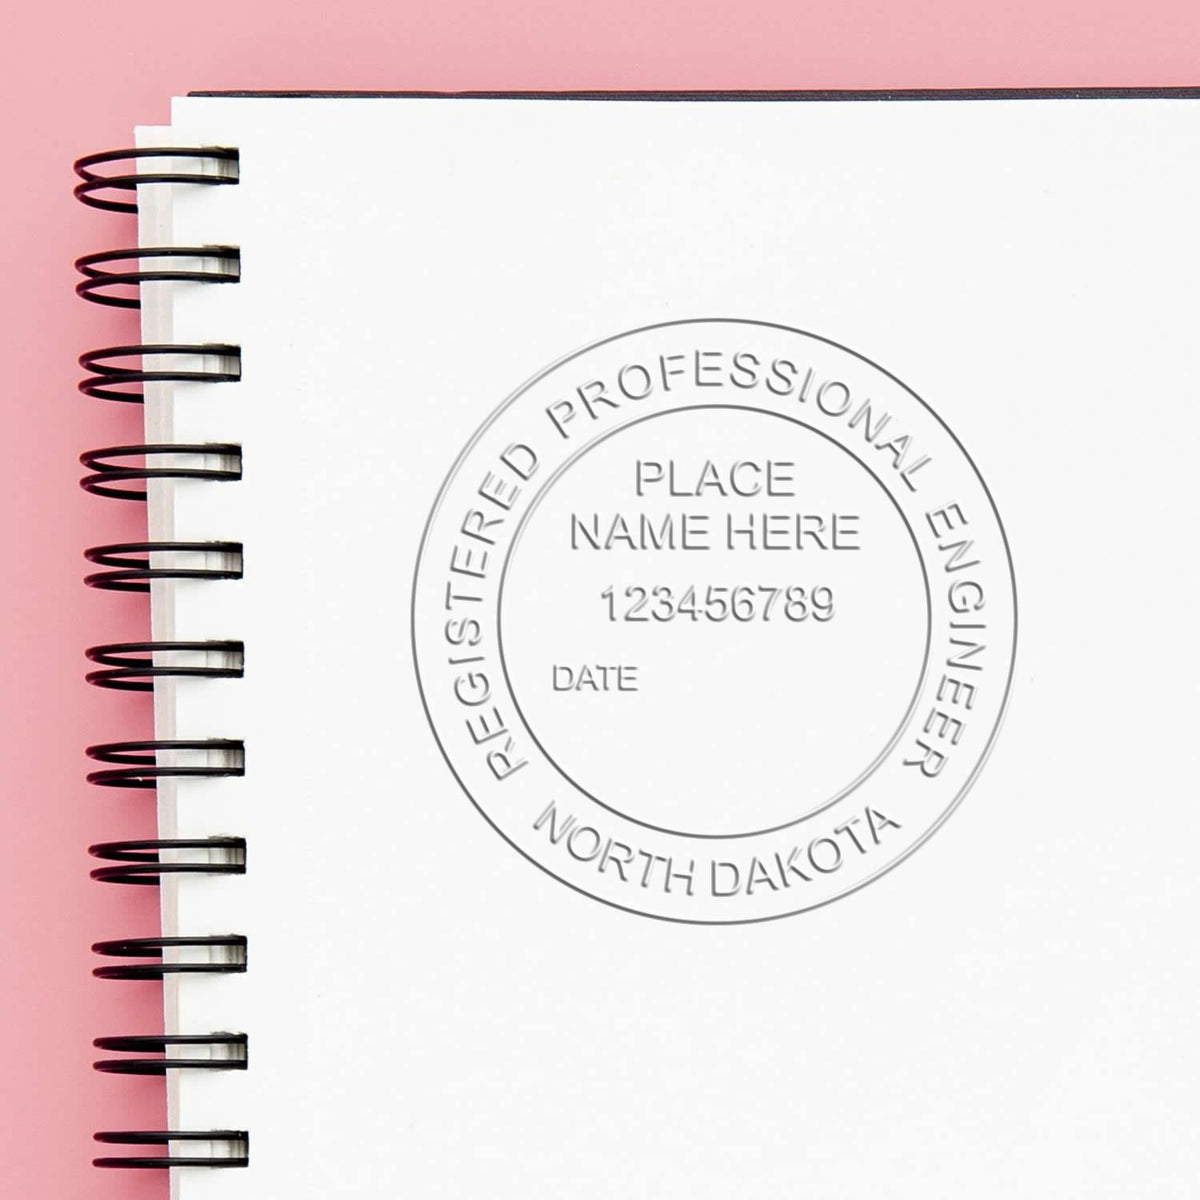 The Gift North Dakota Engineer Seal stamp impression comes to life with a crisp, detailed image stamped on paper - showcasing true professional quality.